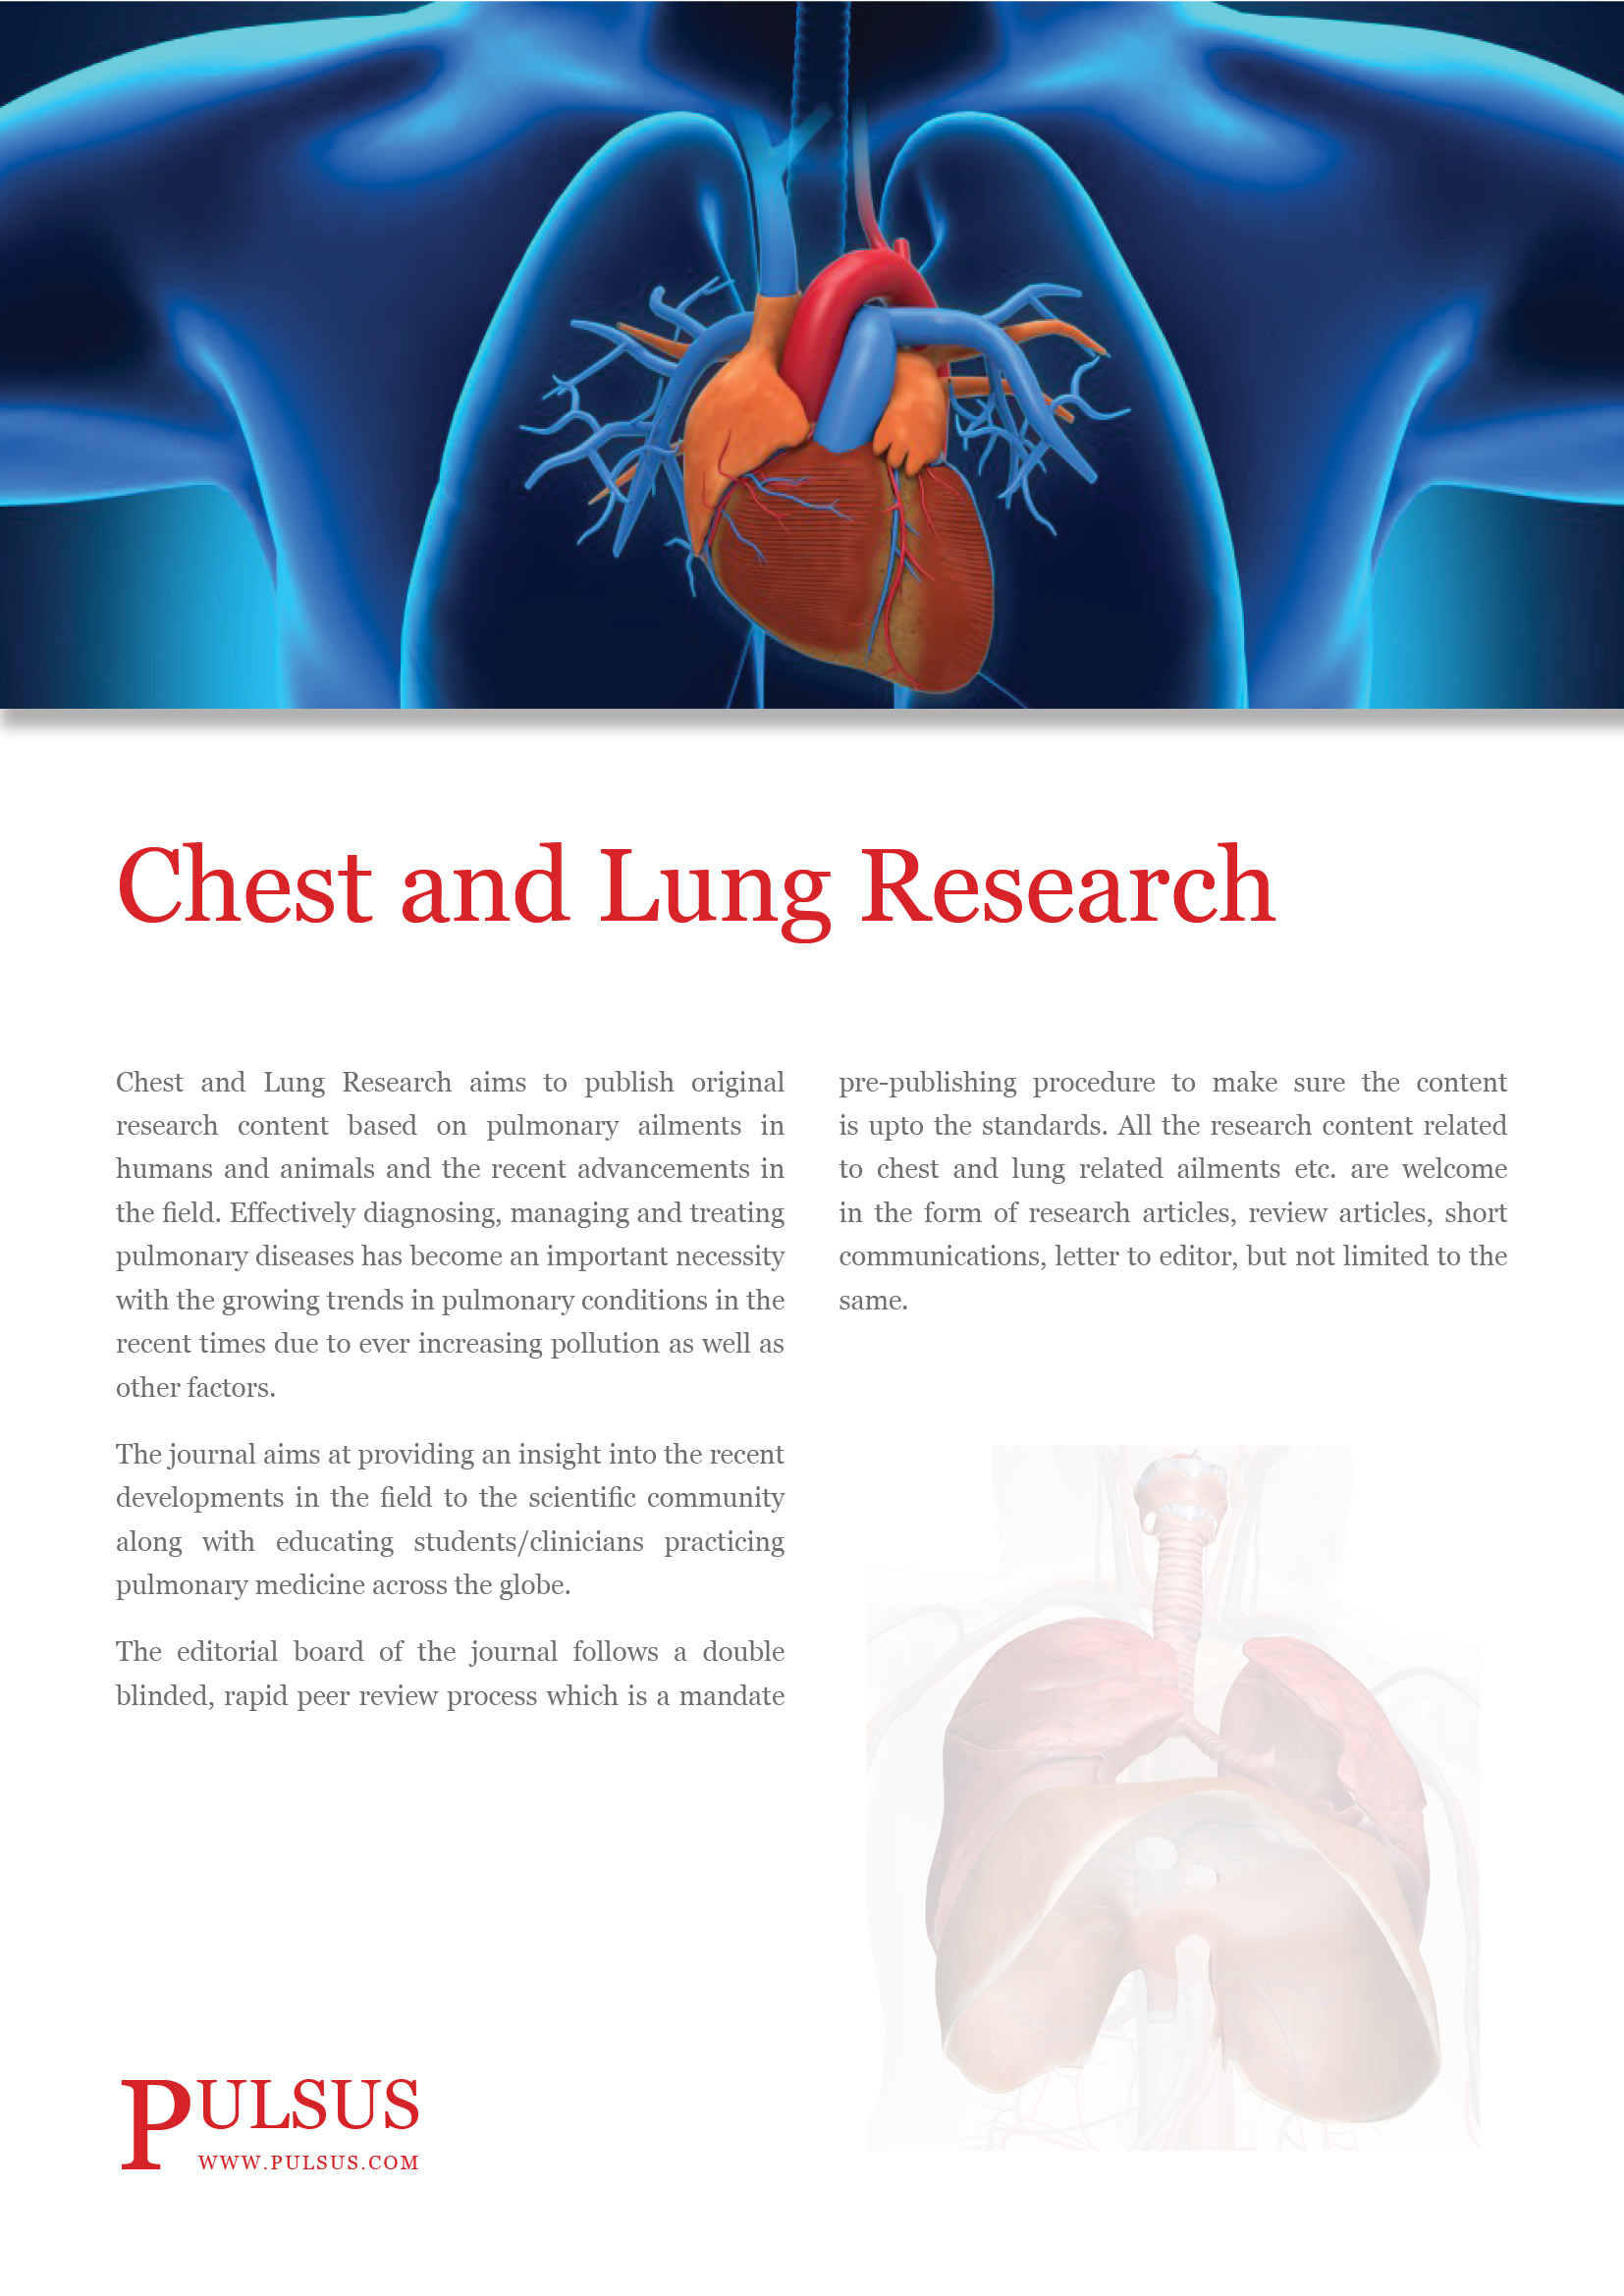 Chest and Lung Research